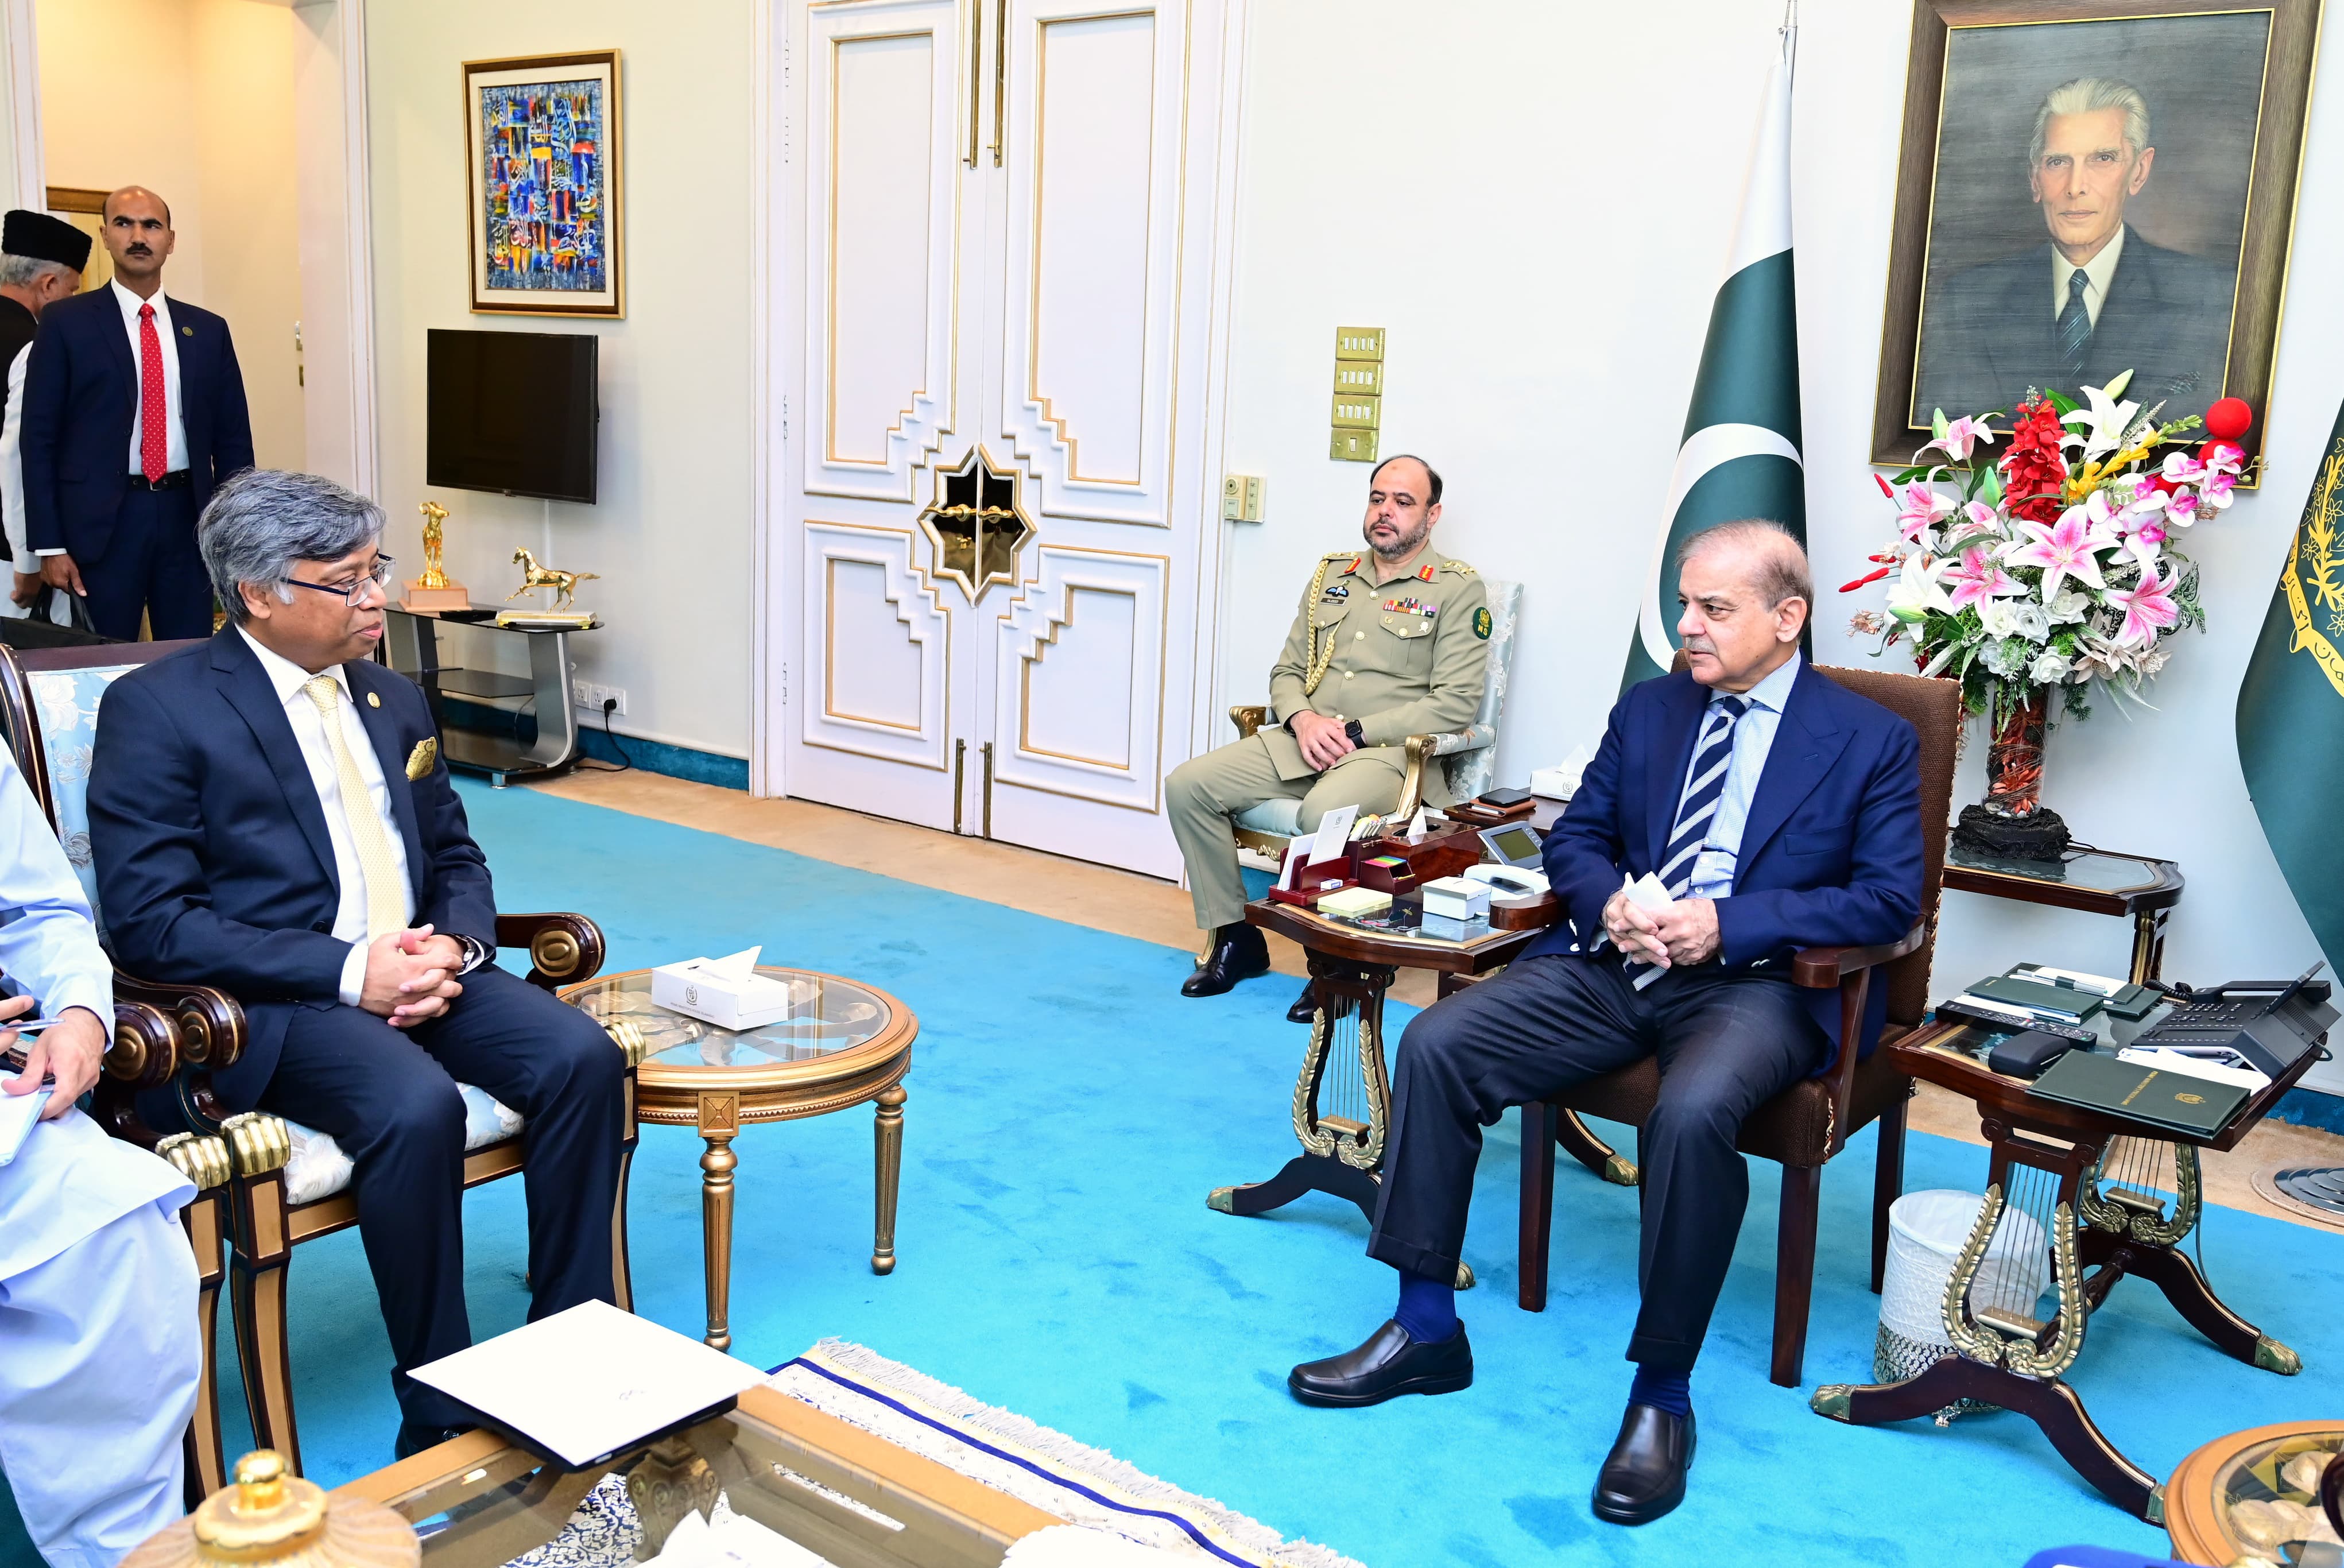 H.E. The Secretary General paid a courtesy call on His Excellency Mr. Muhammad Shehbaz Sharif, Prime Minister of the Islamic Republic of Pakistan in Islamabad